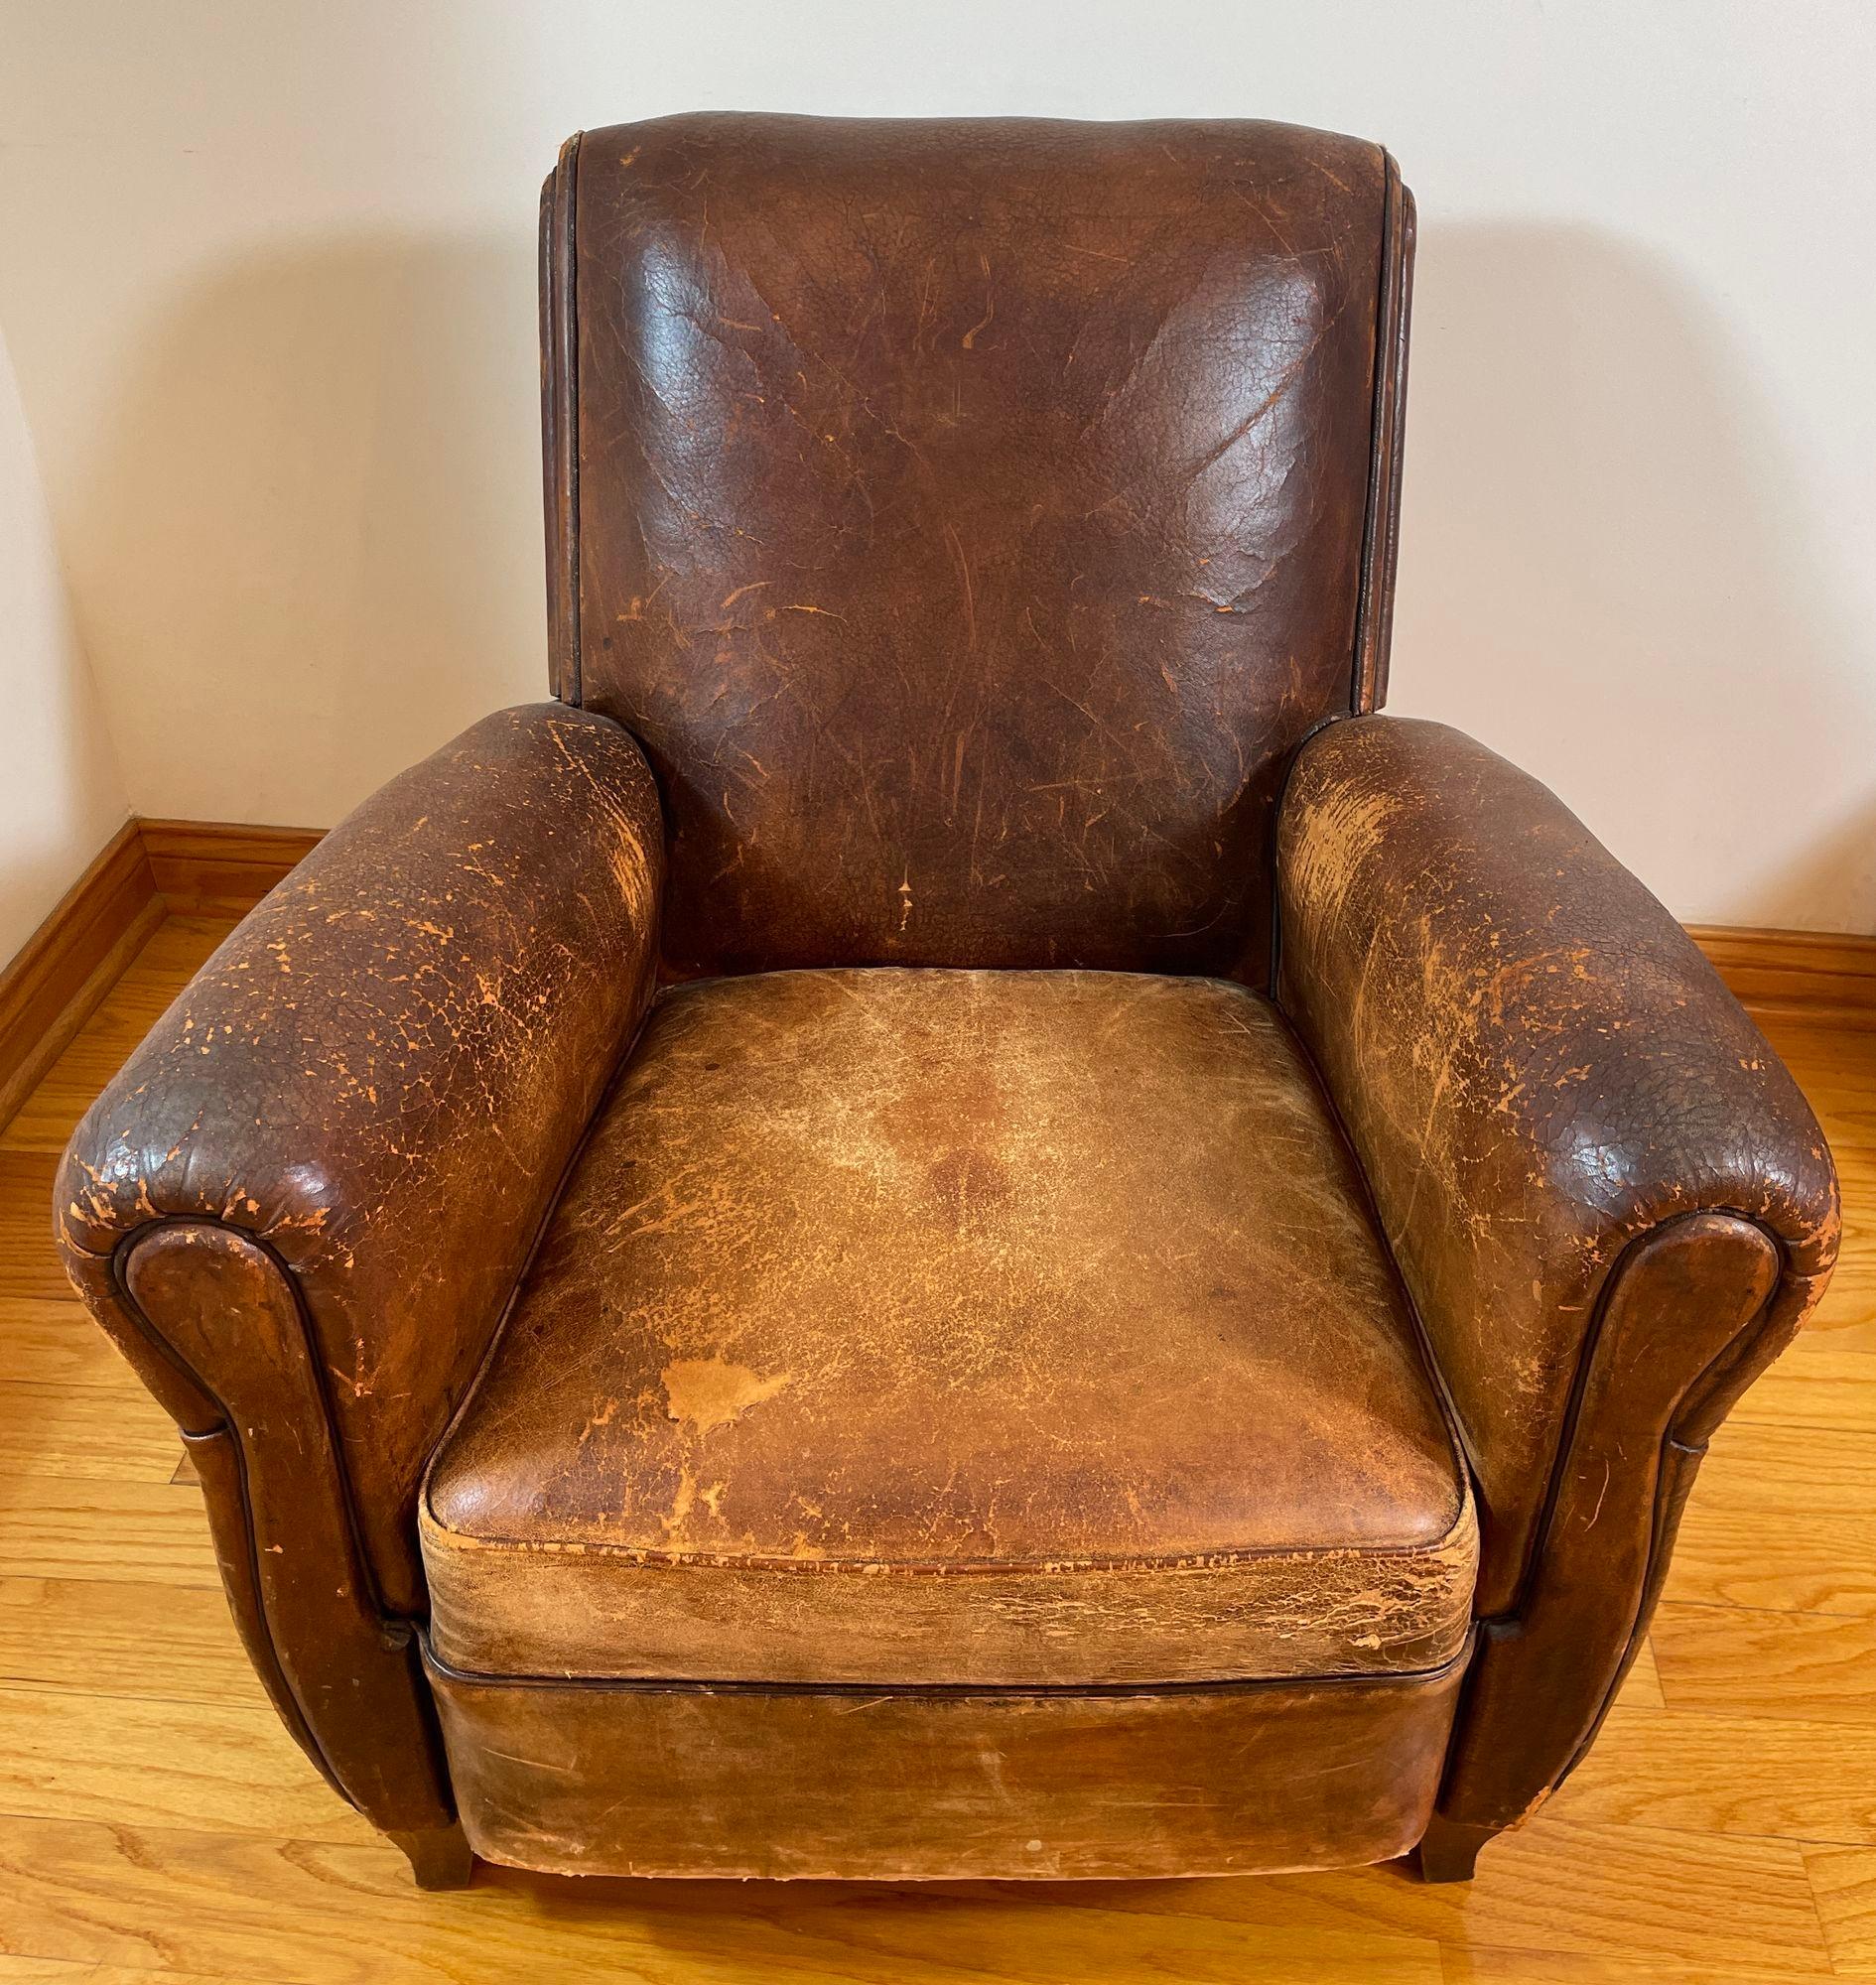 Antique 1930s French Brown Leather Club Chair.
French Art Deco Original Distressed Leather Club Chair.
Classic French Art Deco leather club chair dating from the 1930's with its original leather resting on block wood feet.
The original leather is